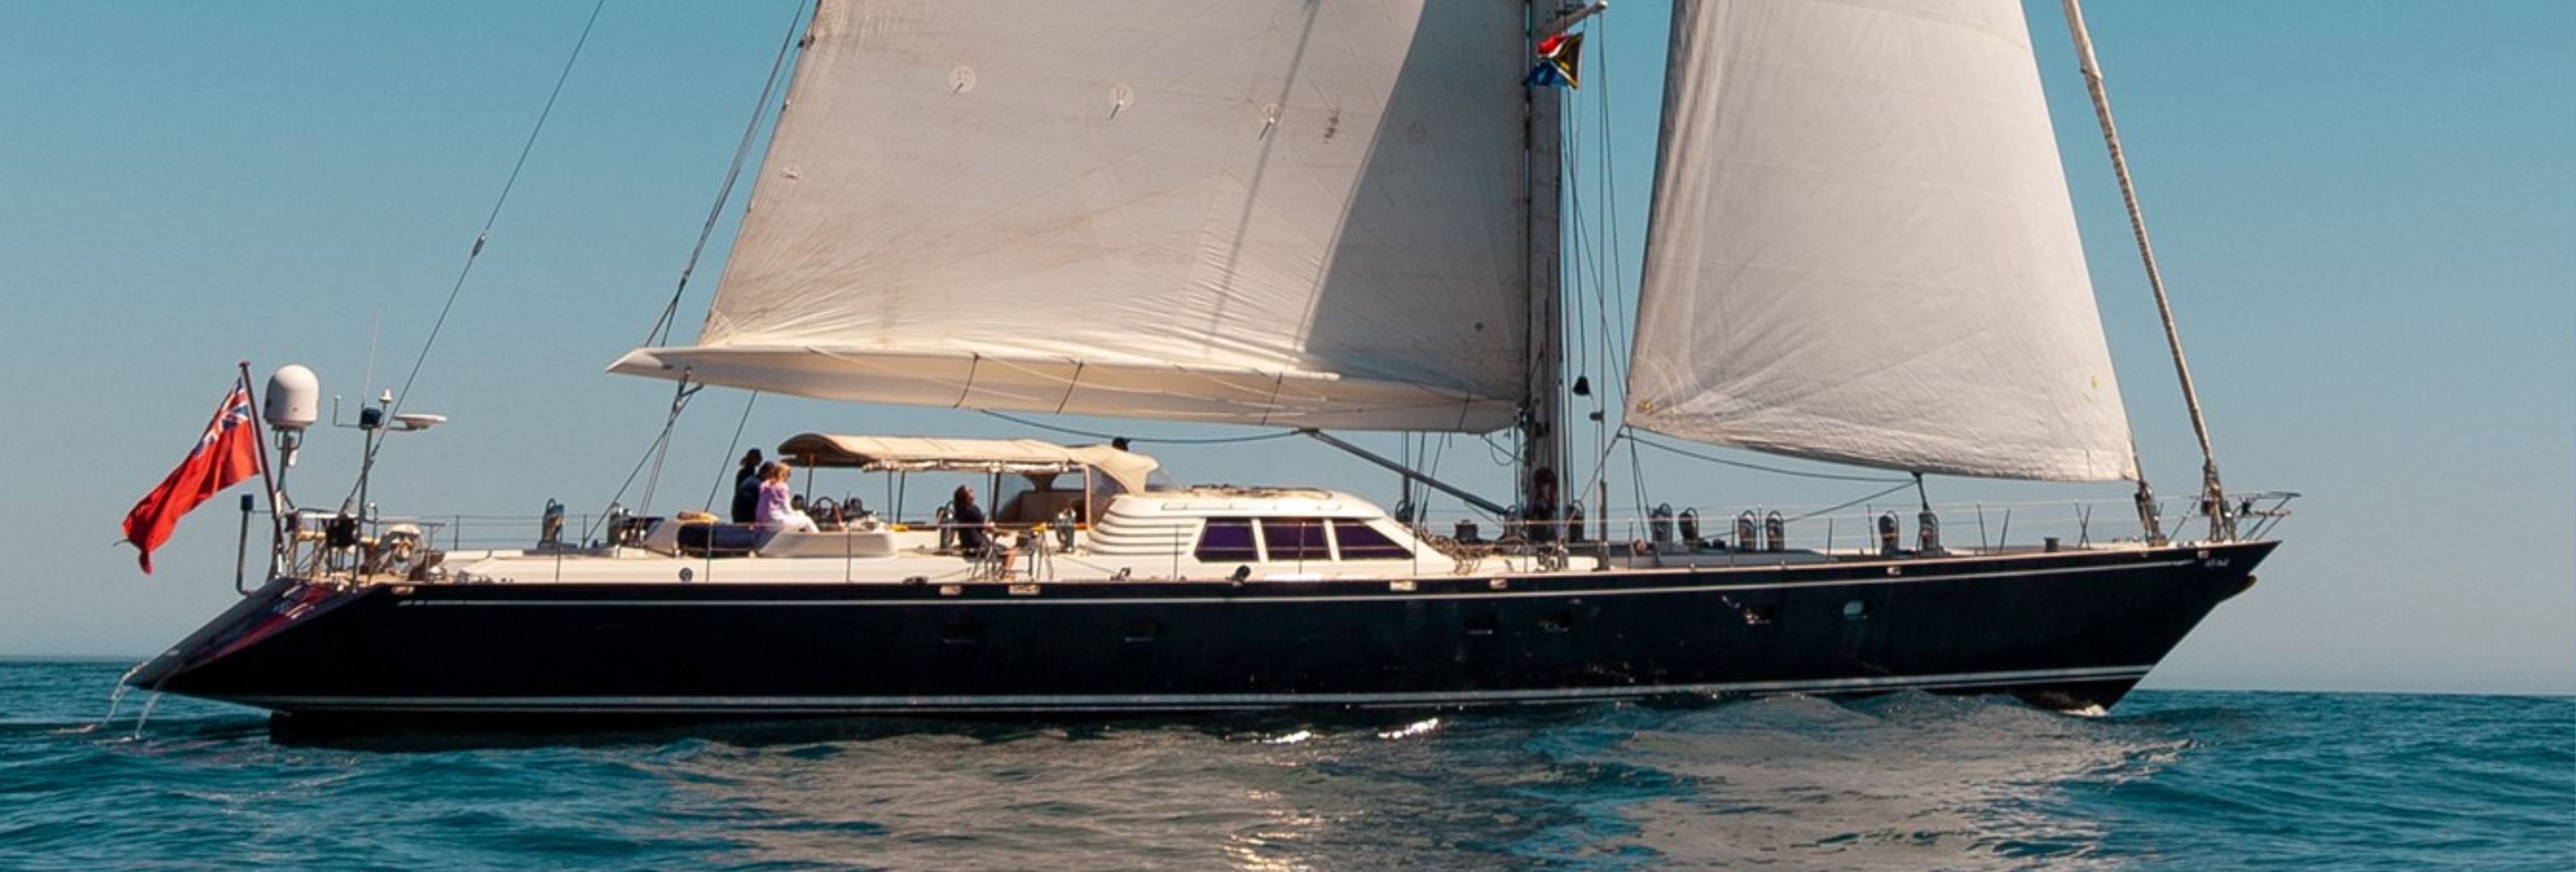 BILLY BUDD : New Sailing Yacht for sale